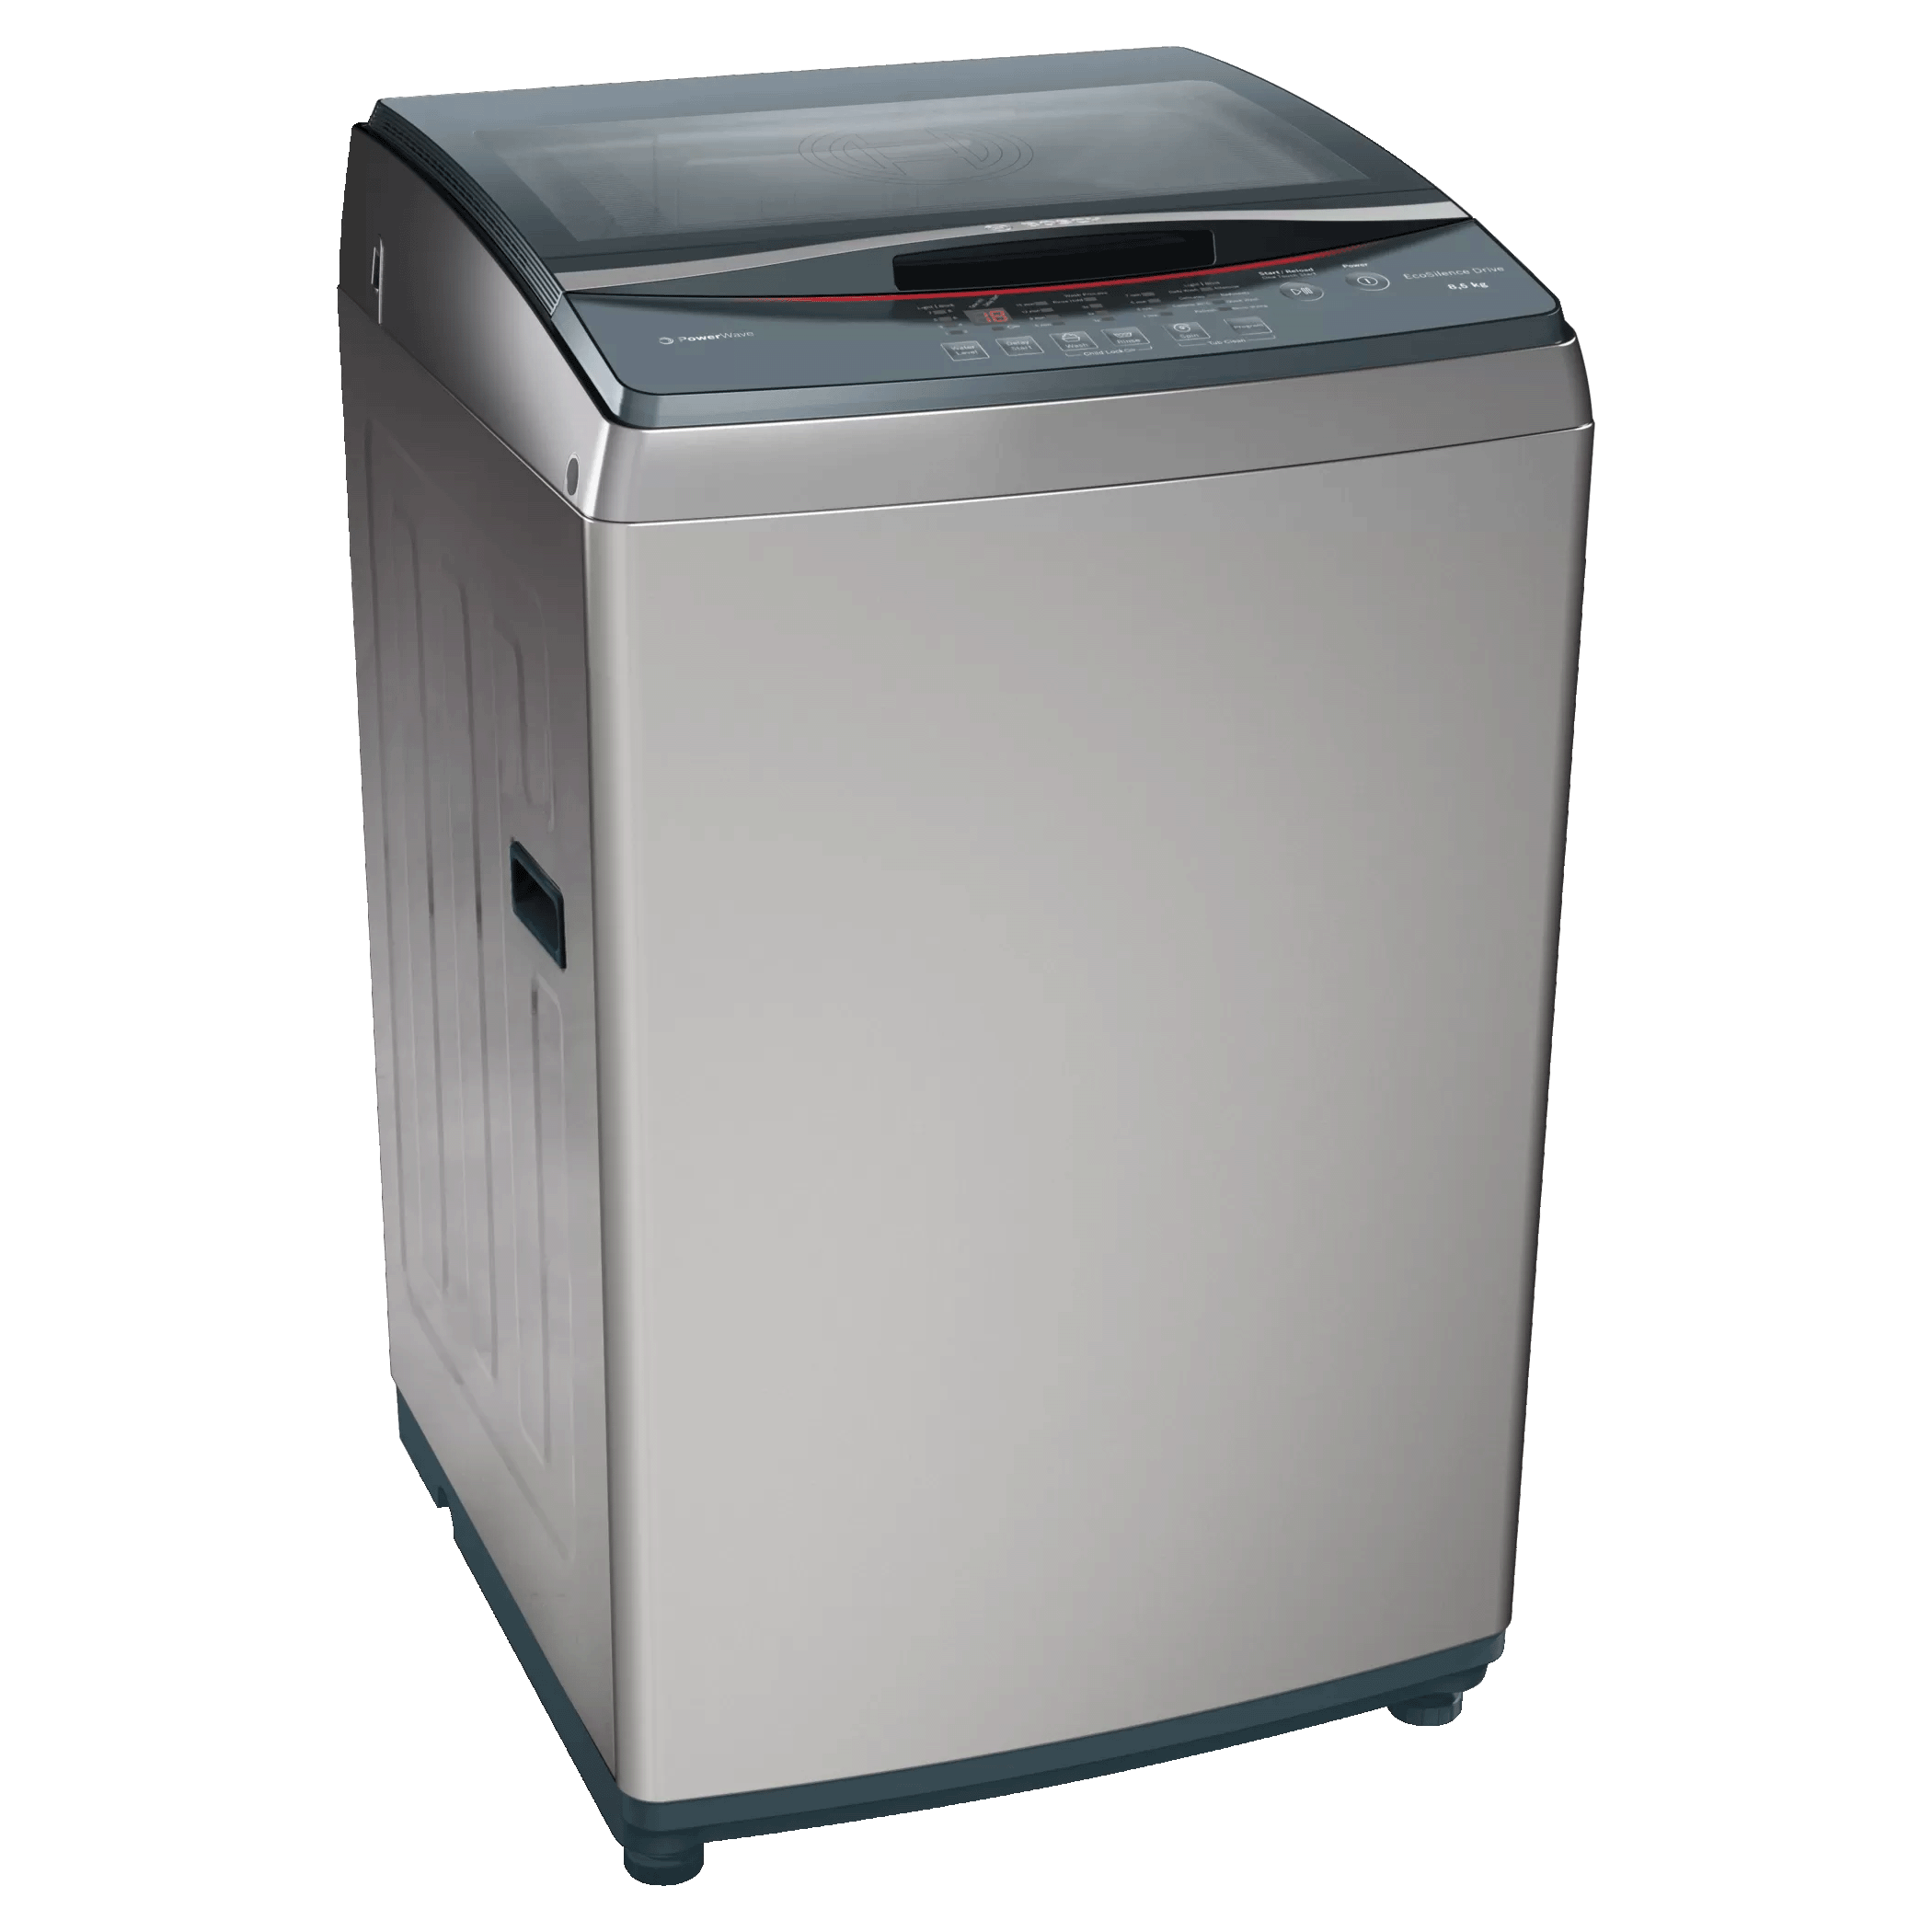 Bosch Serie 4 7 kg Fully Automatic Top Load Washing Machine (WOE702D1IN, Dark Silver)_1